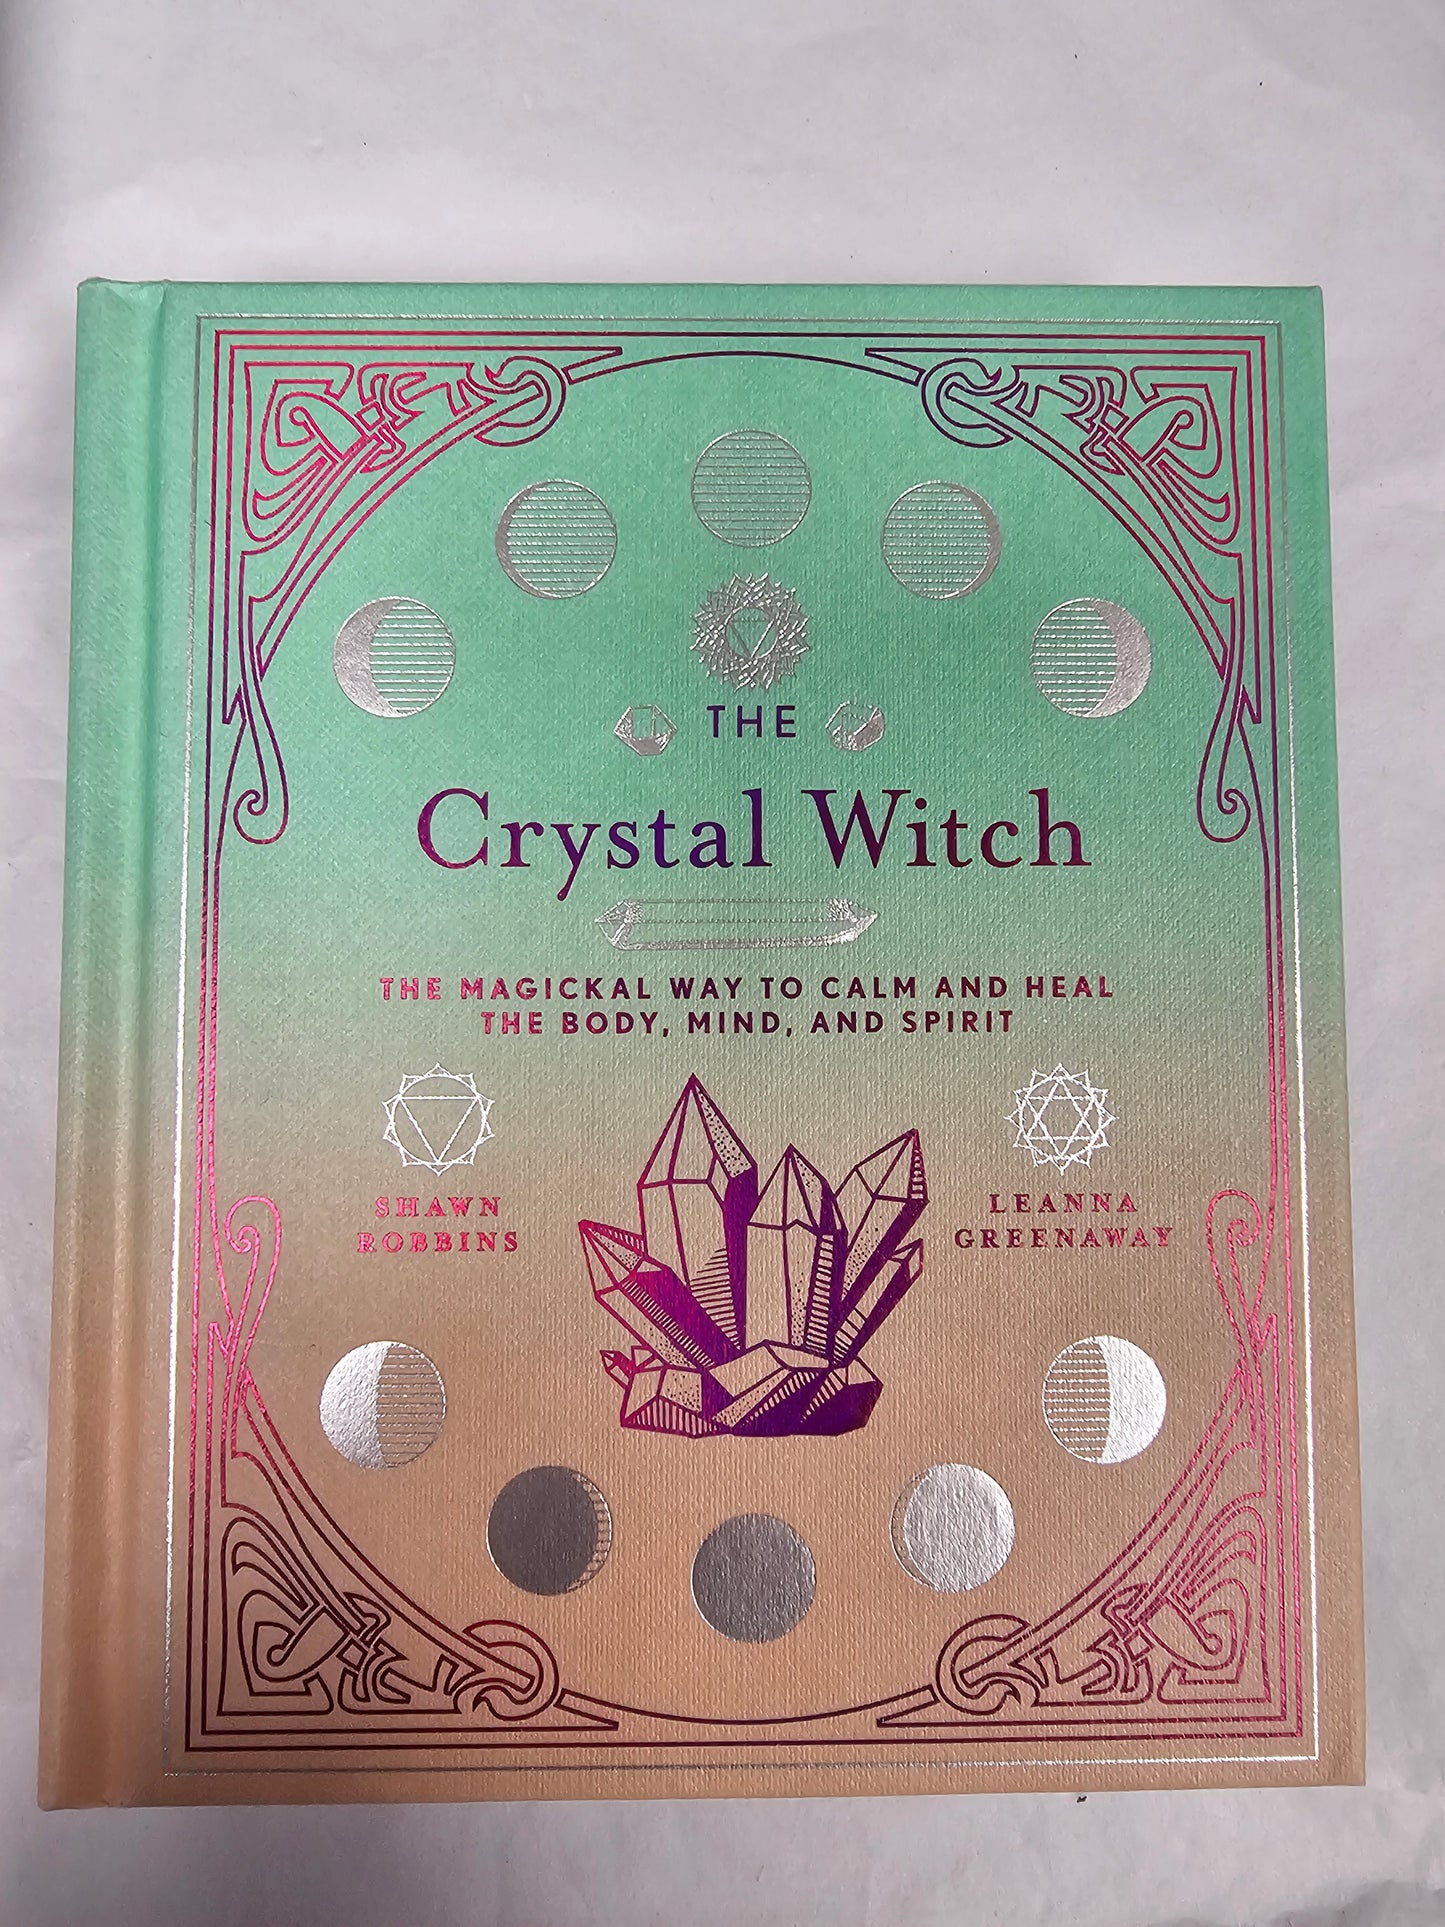 The Crystal Witch book